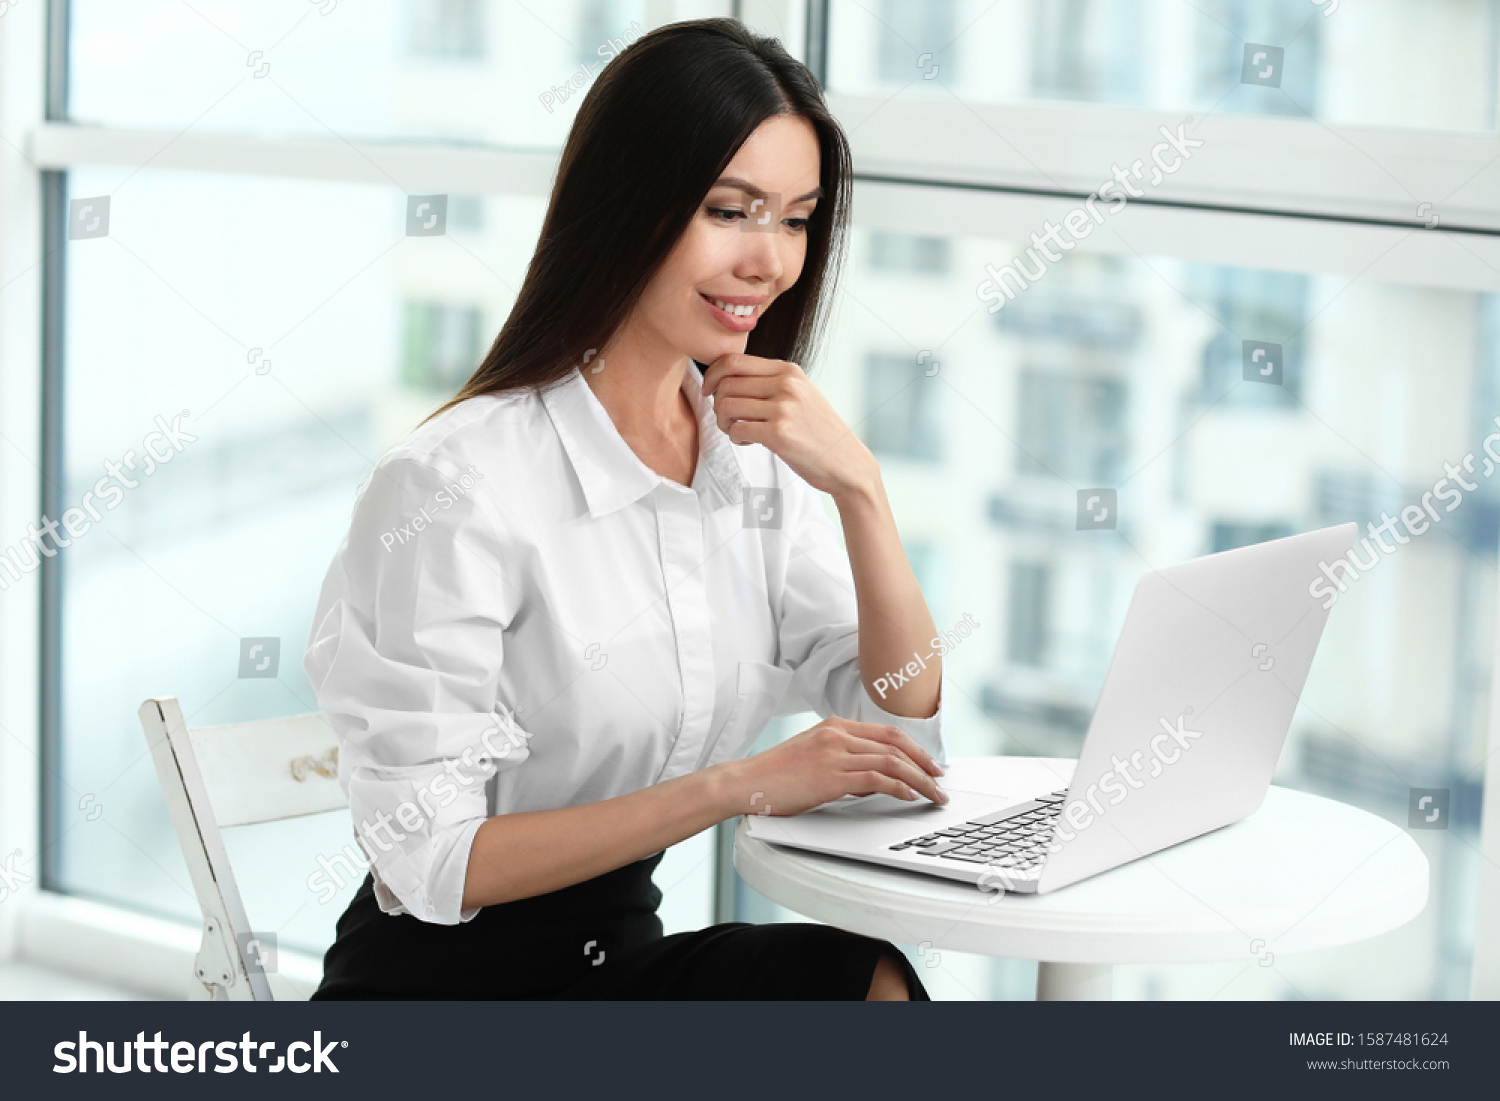 Beautiful Asian businesswoman with laptop in office #1587481624